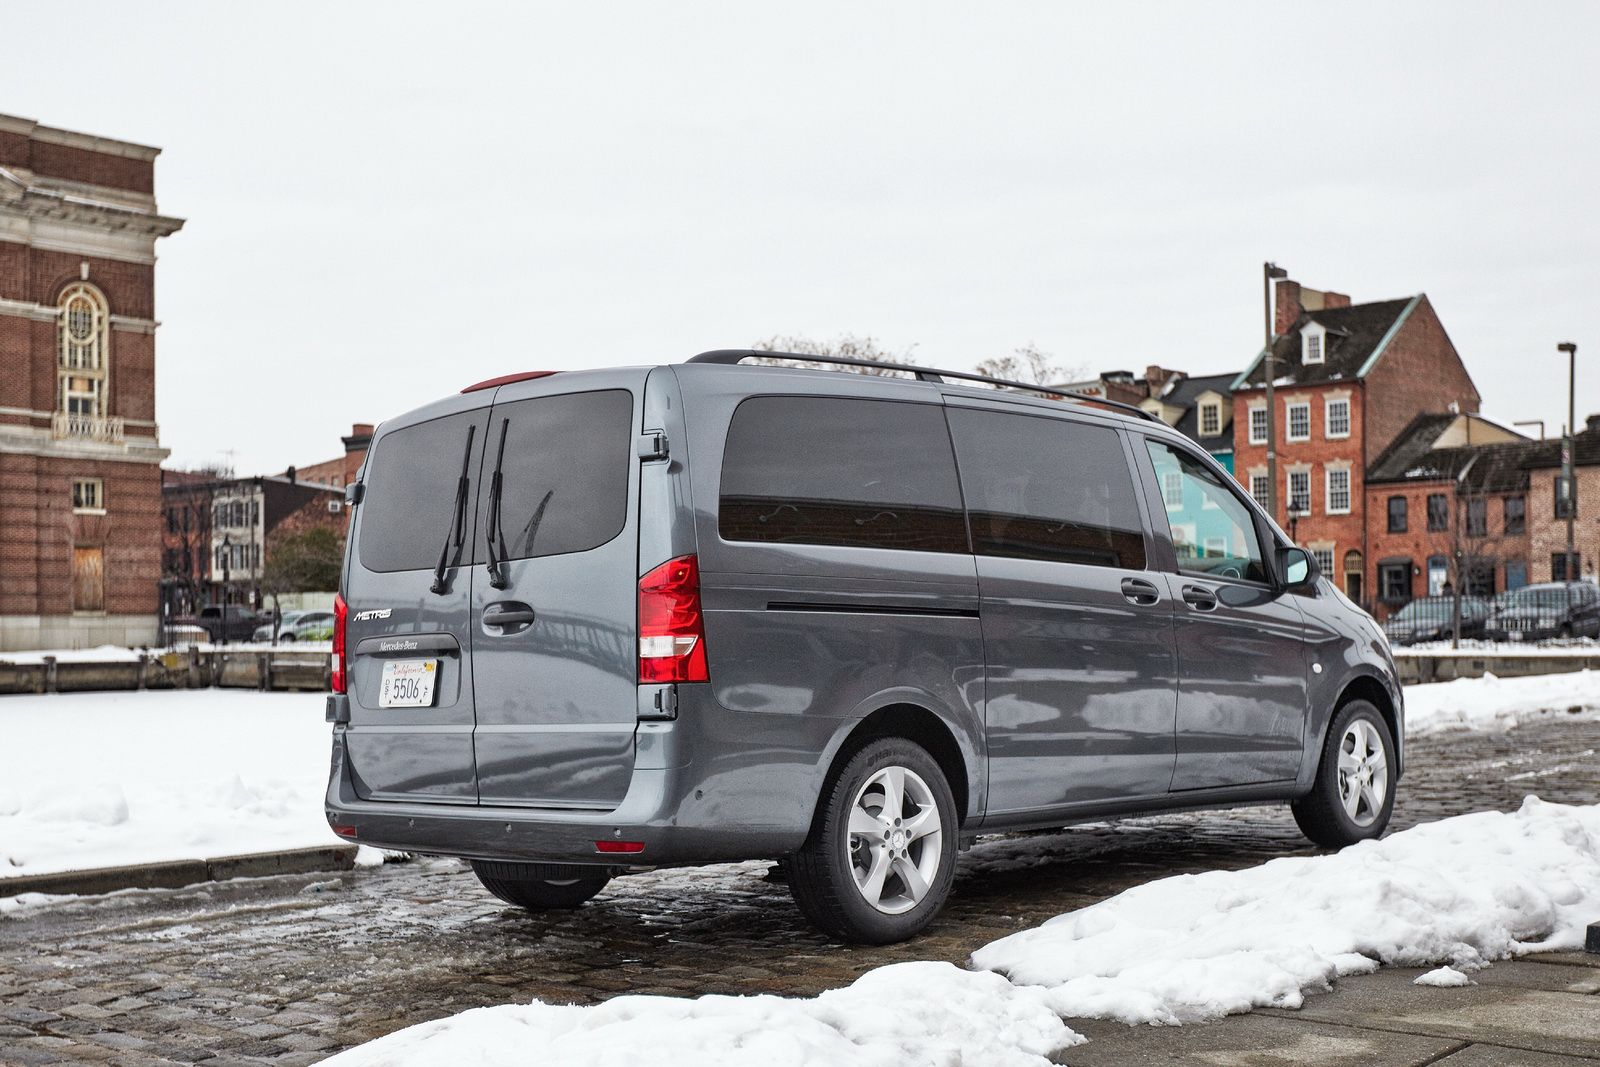 North America Gets Mercedes-Benz Vito Badged as the Metris, but not the  V-Class